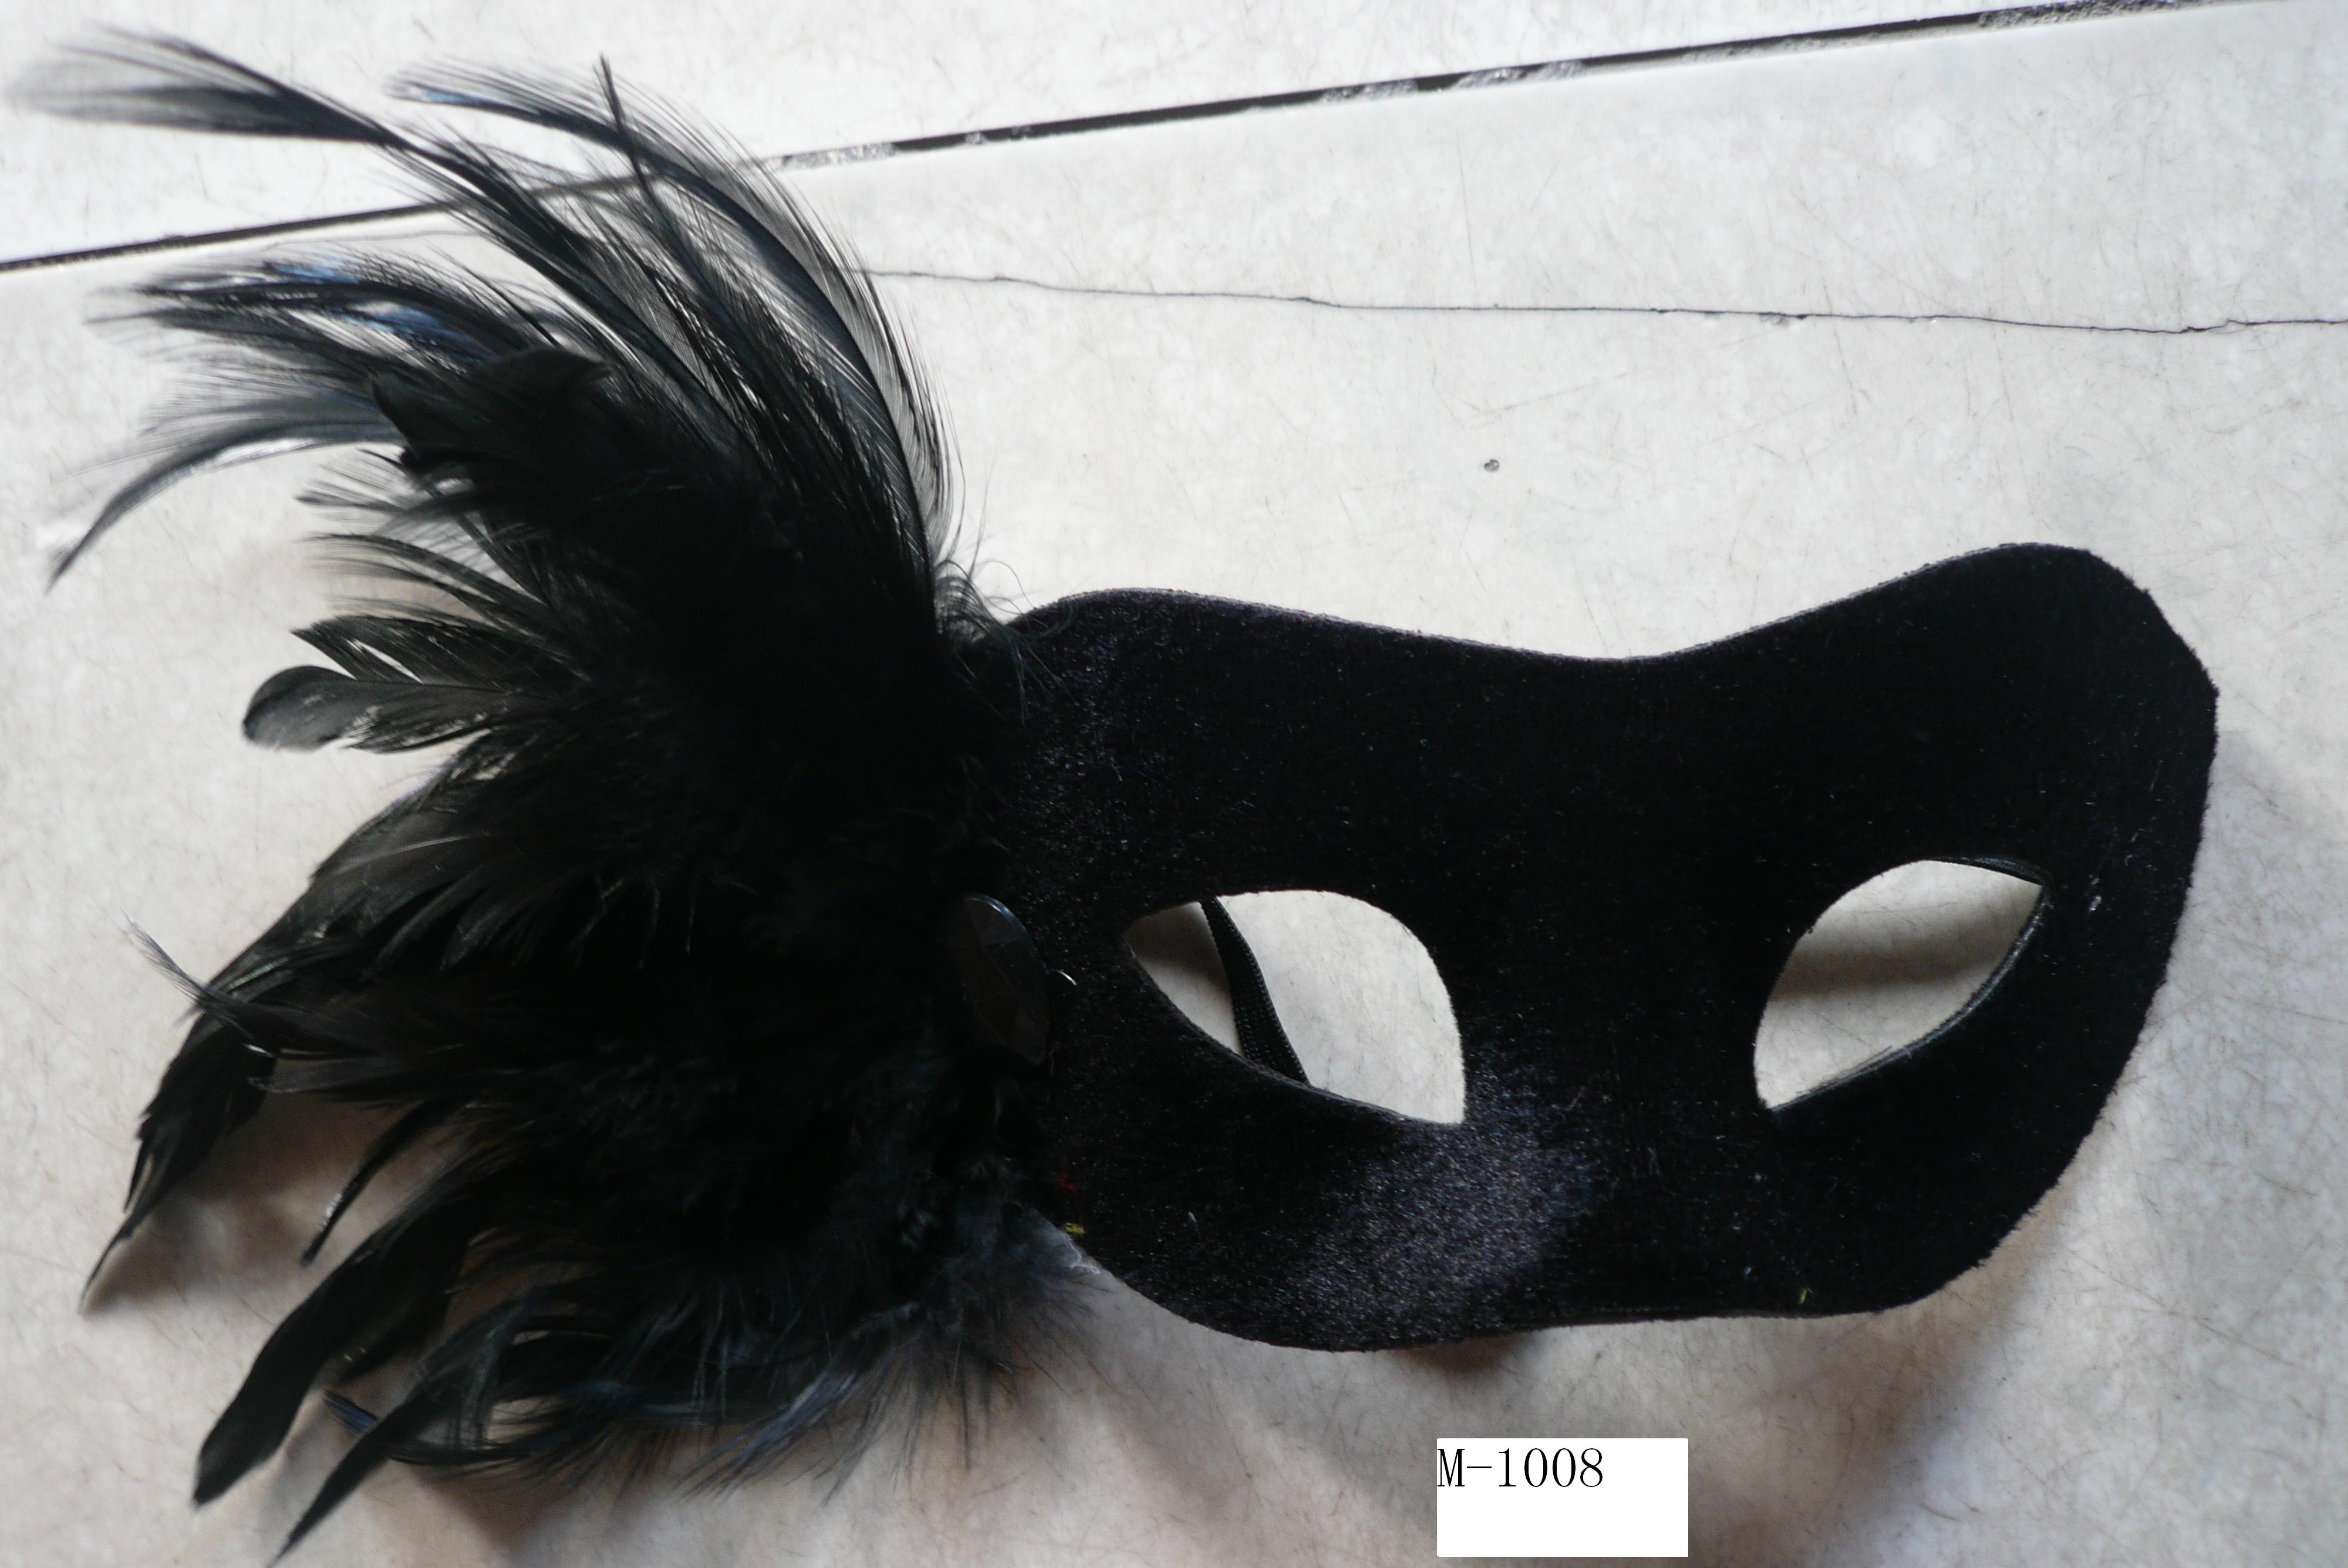 Cheap feather masks for sale - Made in China M-1008